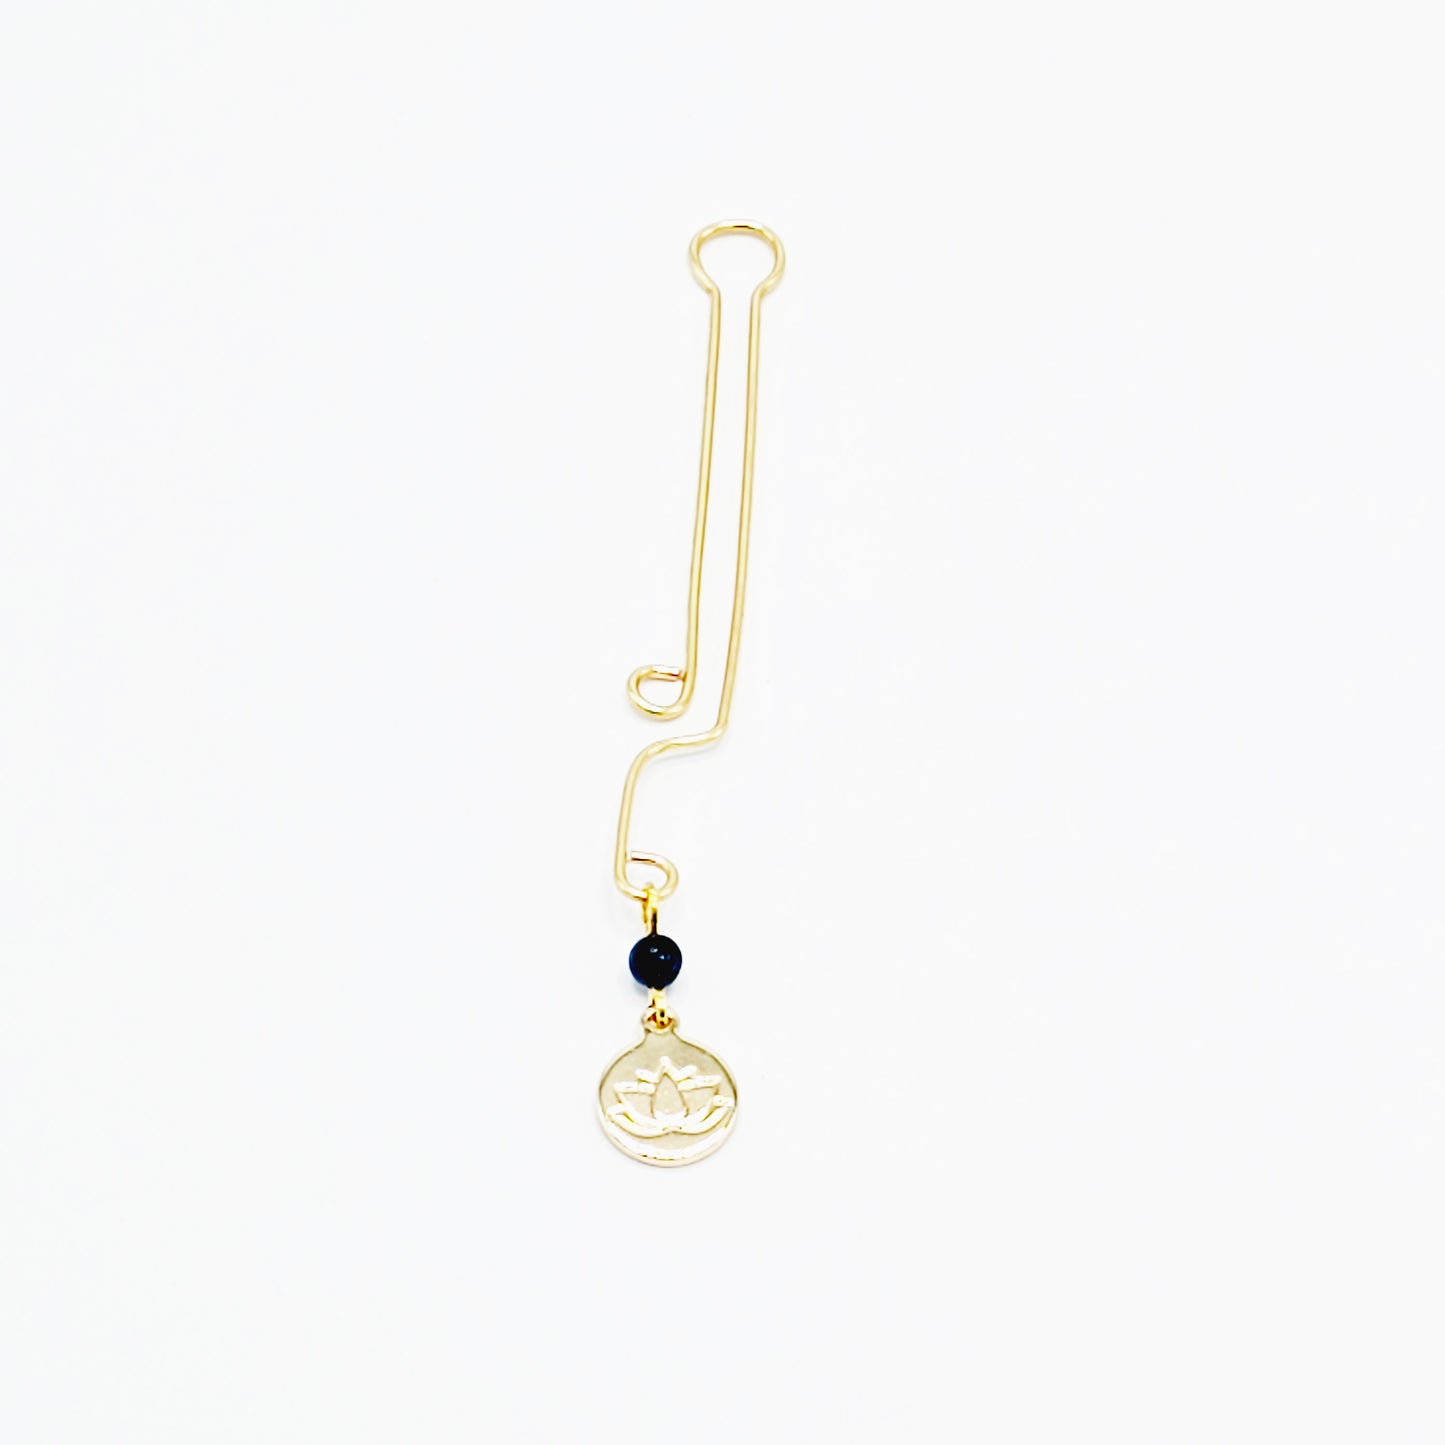 Gold Labia Clip with 18k Gold Lotus Flower. Non Piercing Clit and Labia Genital Jewelry.